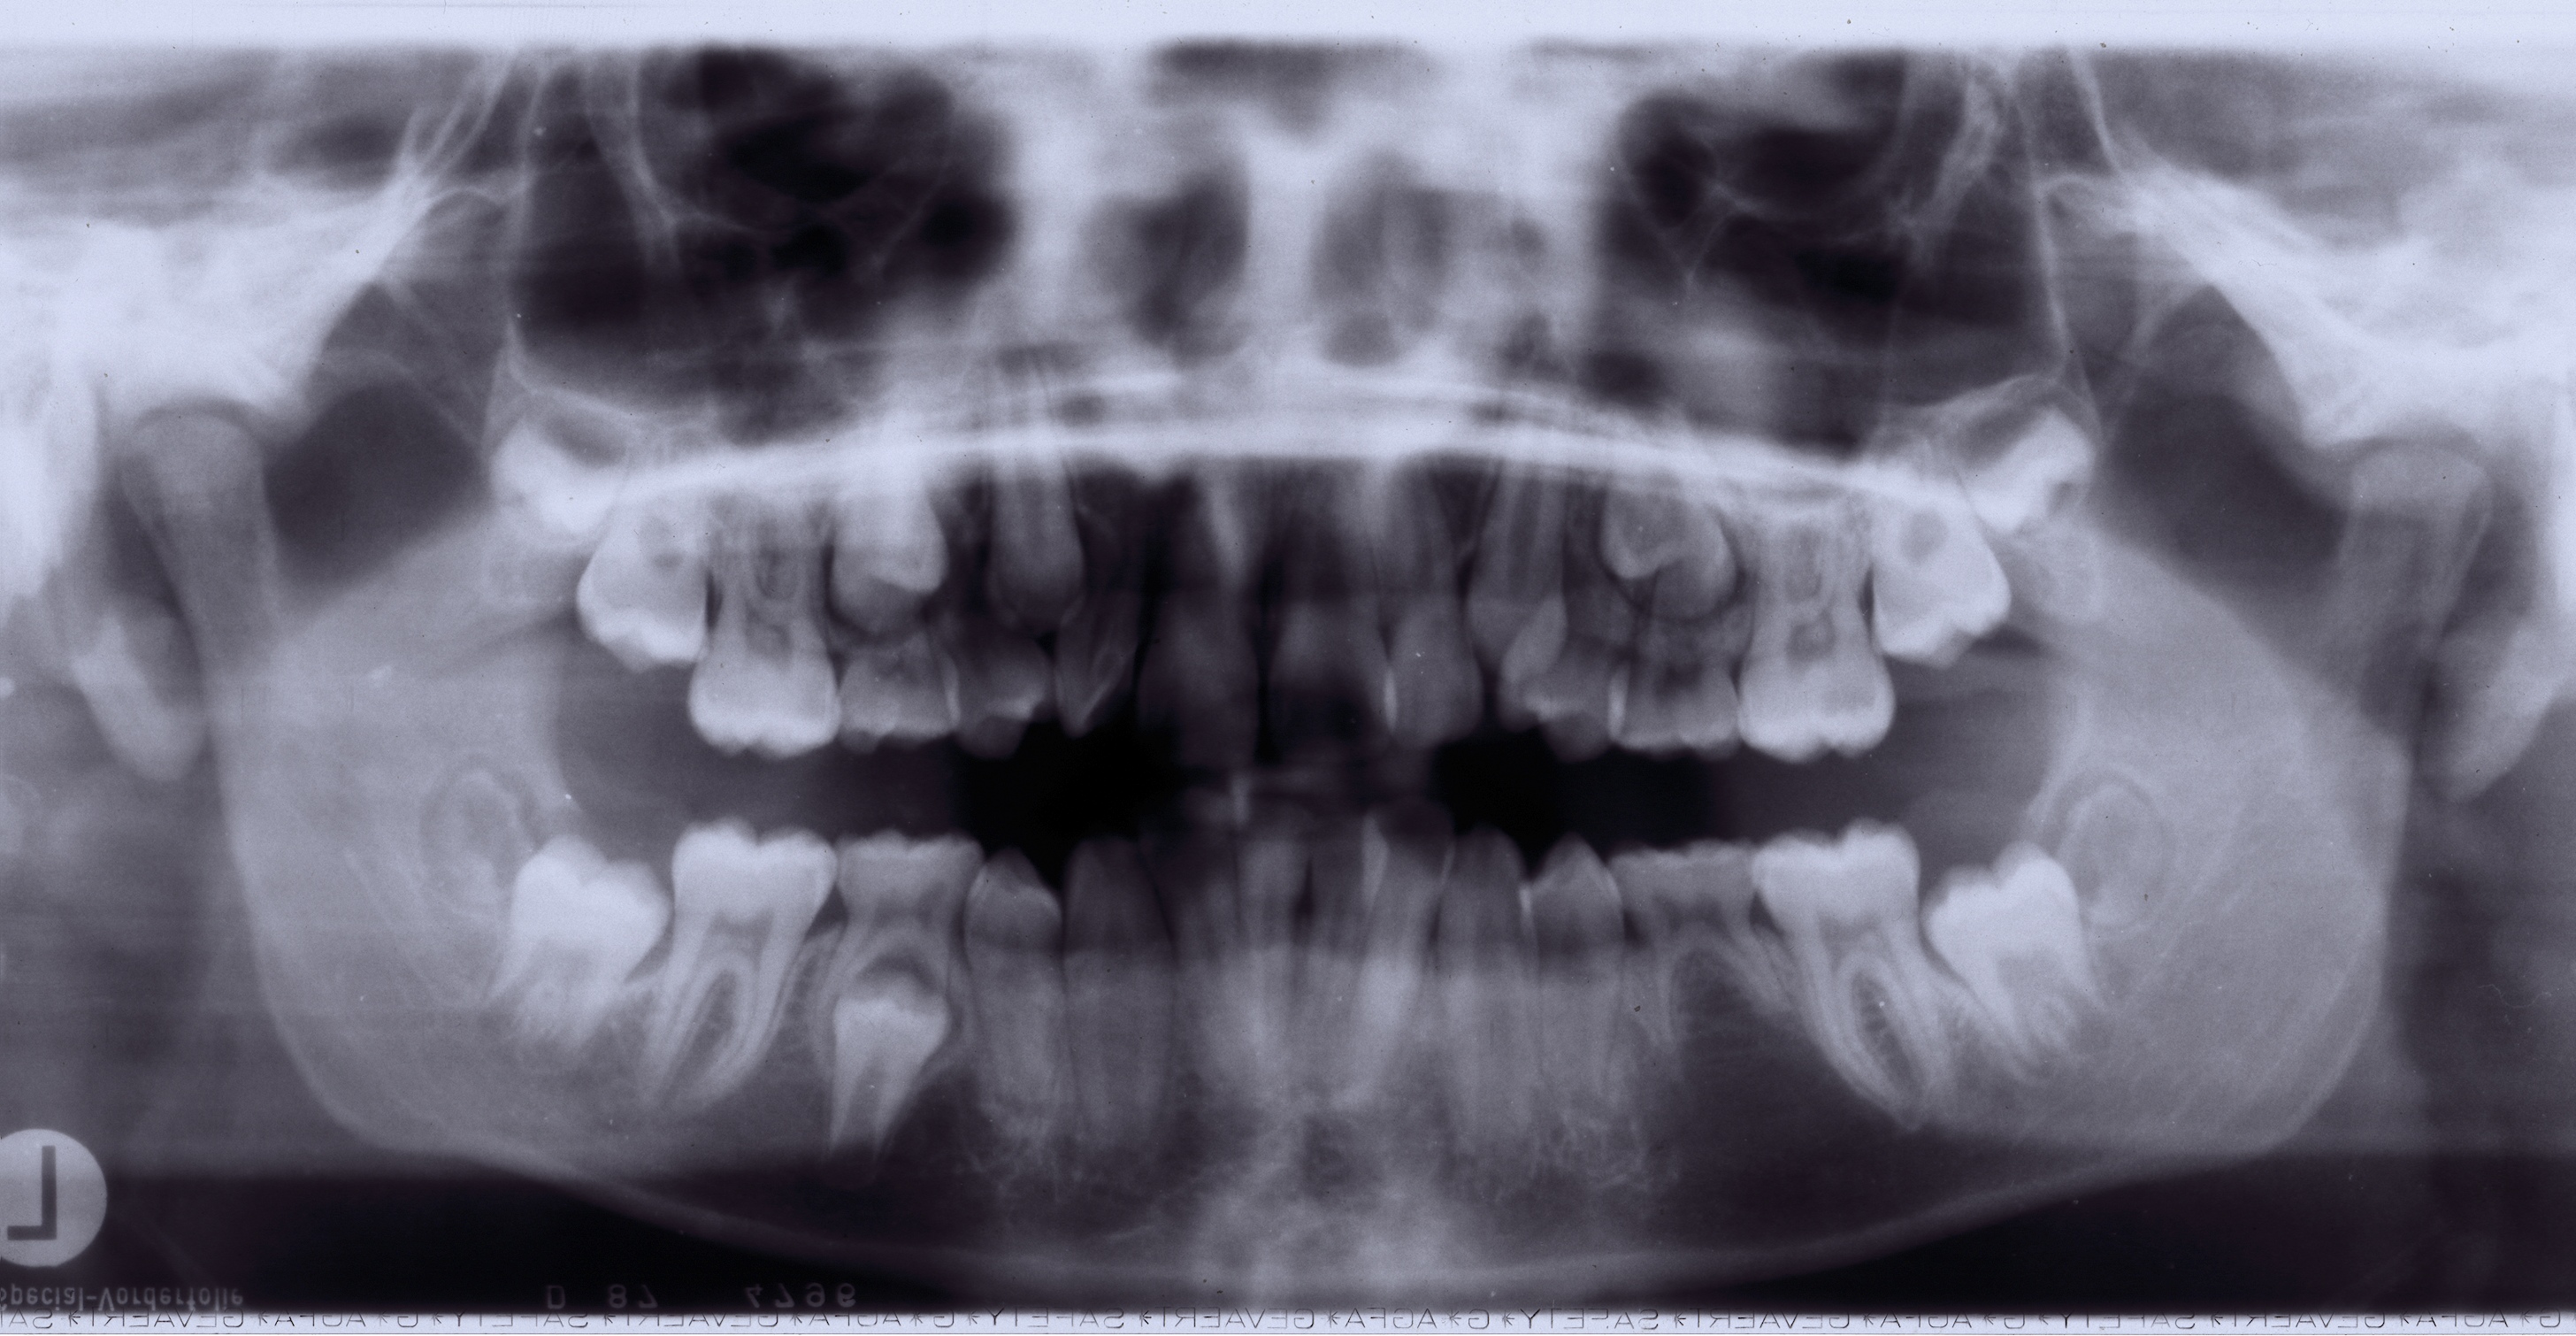 tooth teeth xray nature characters humanparts mouth dentist typo typography numbers agfa gevaert root roots jaw jaws grayscale royalty